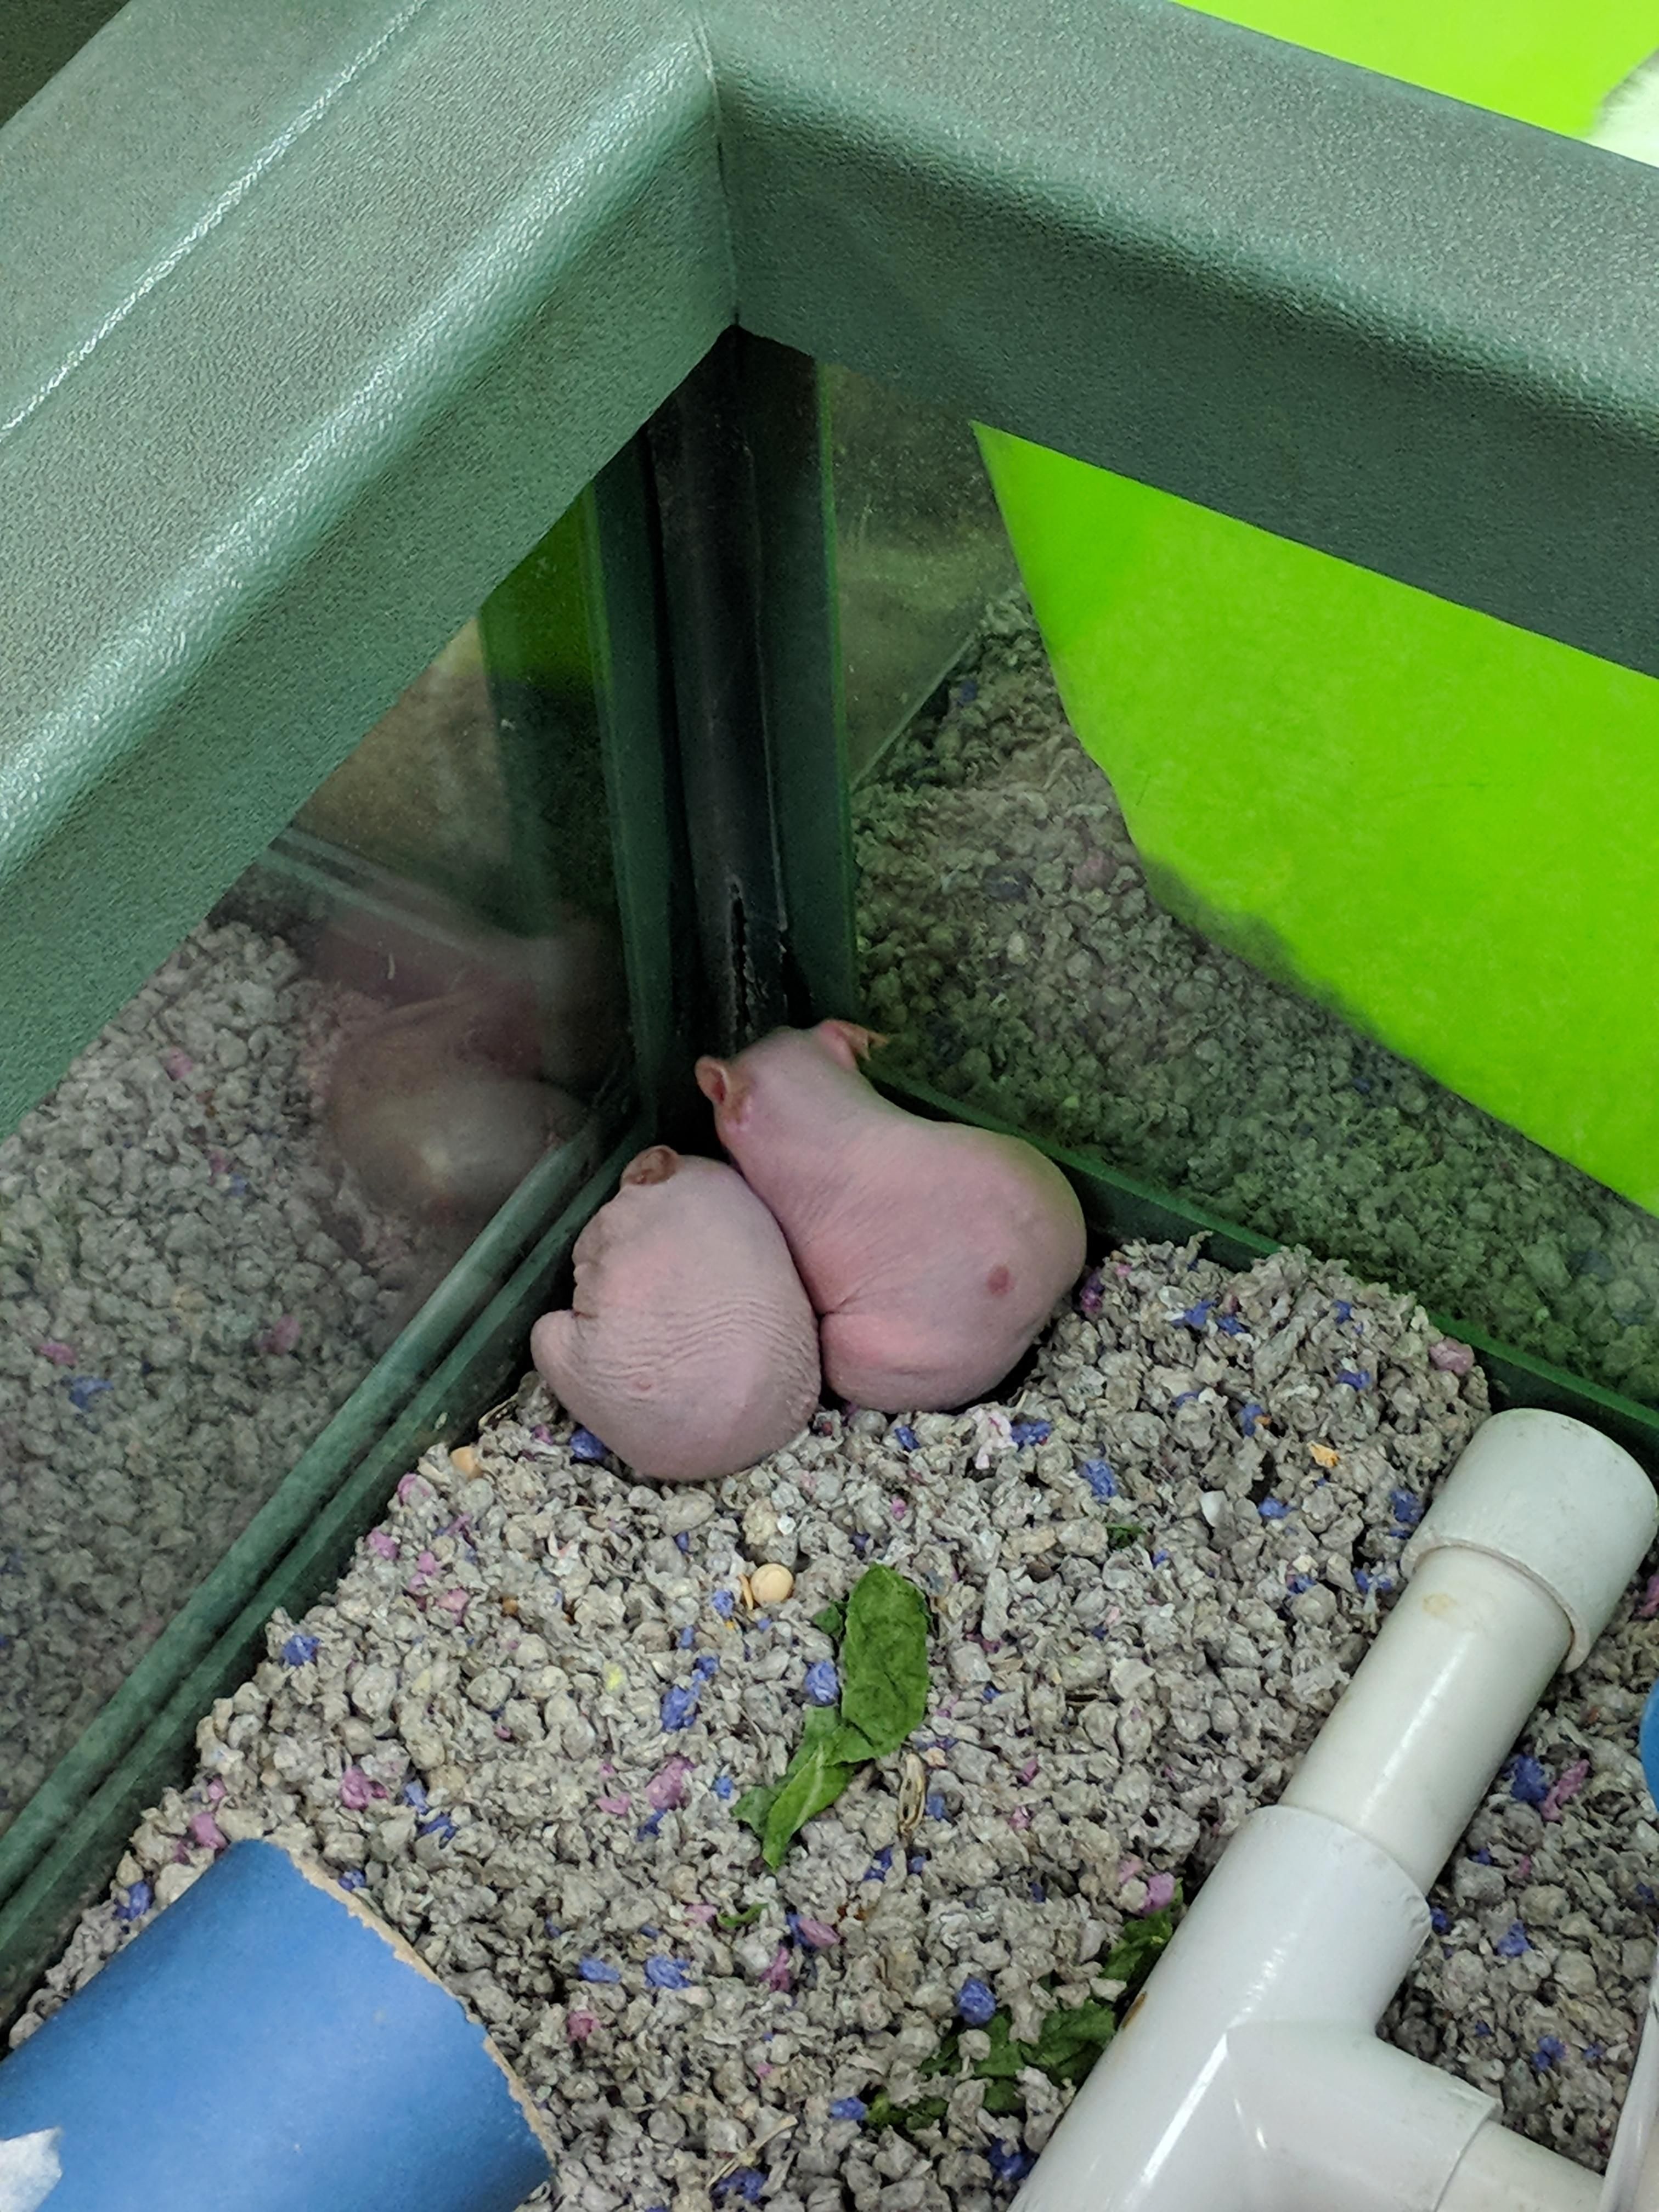 Apparently my local pet store now sells testicles!